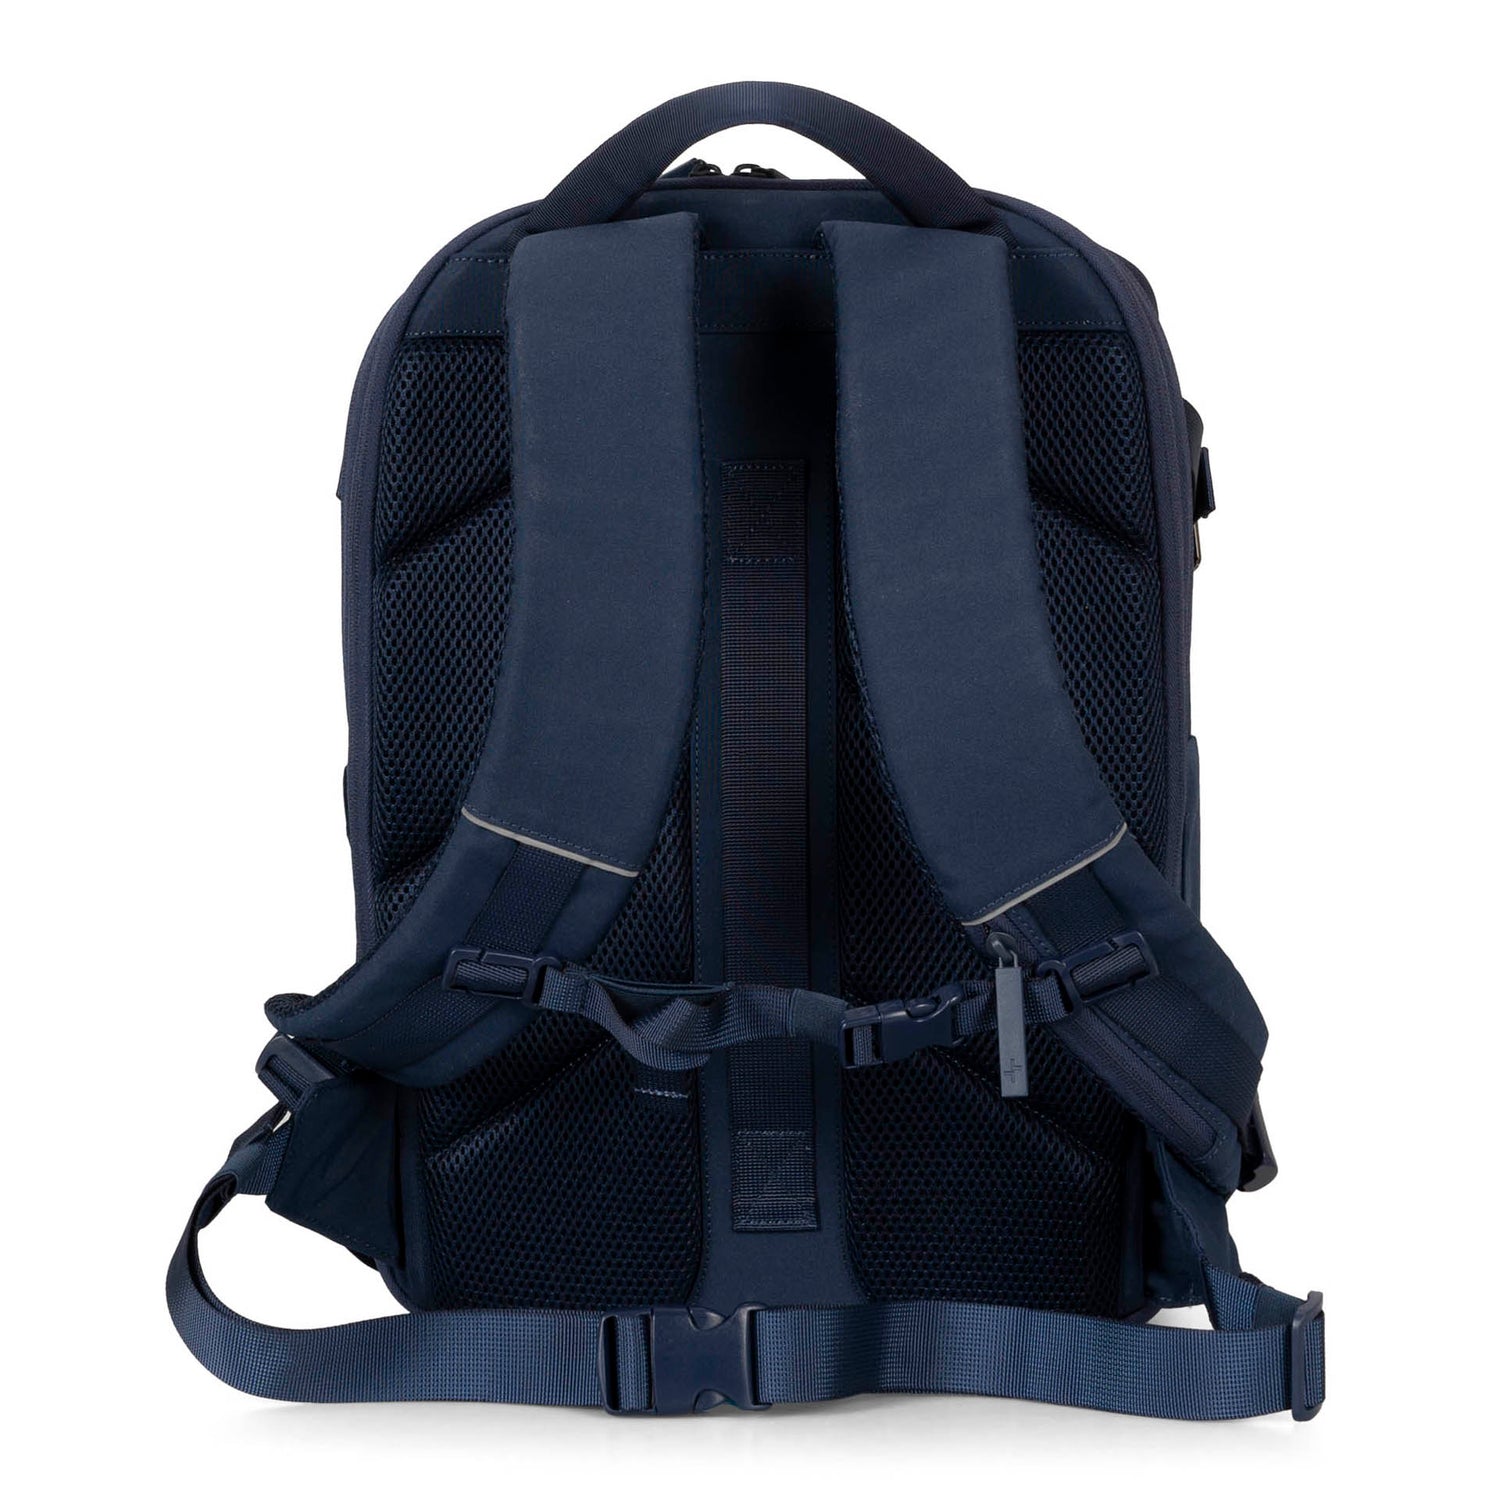 The 5 Continents 2.0 Backpack